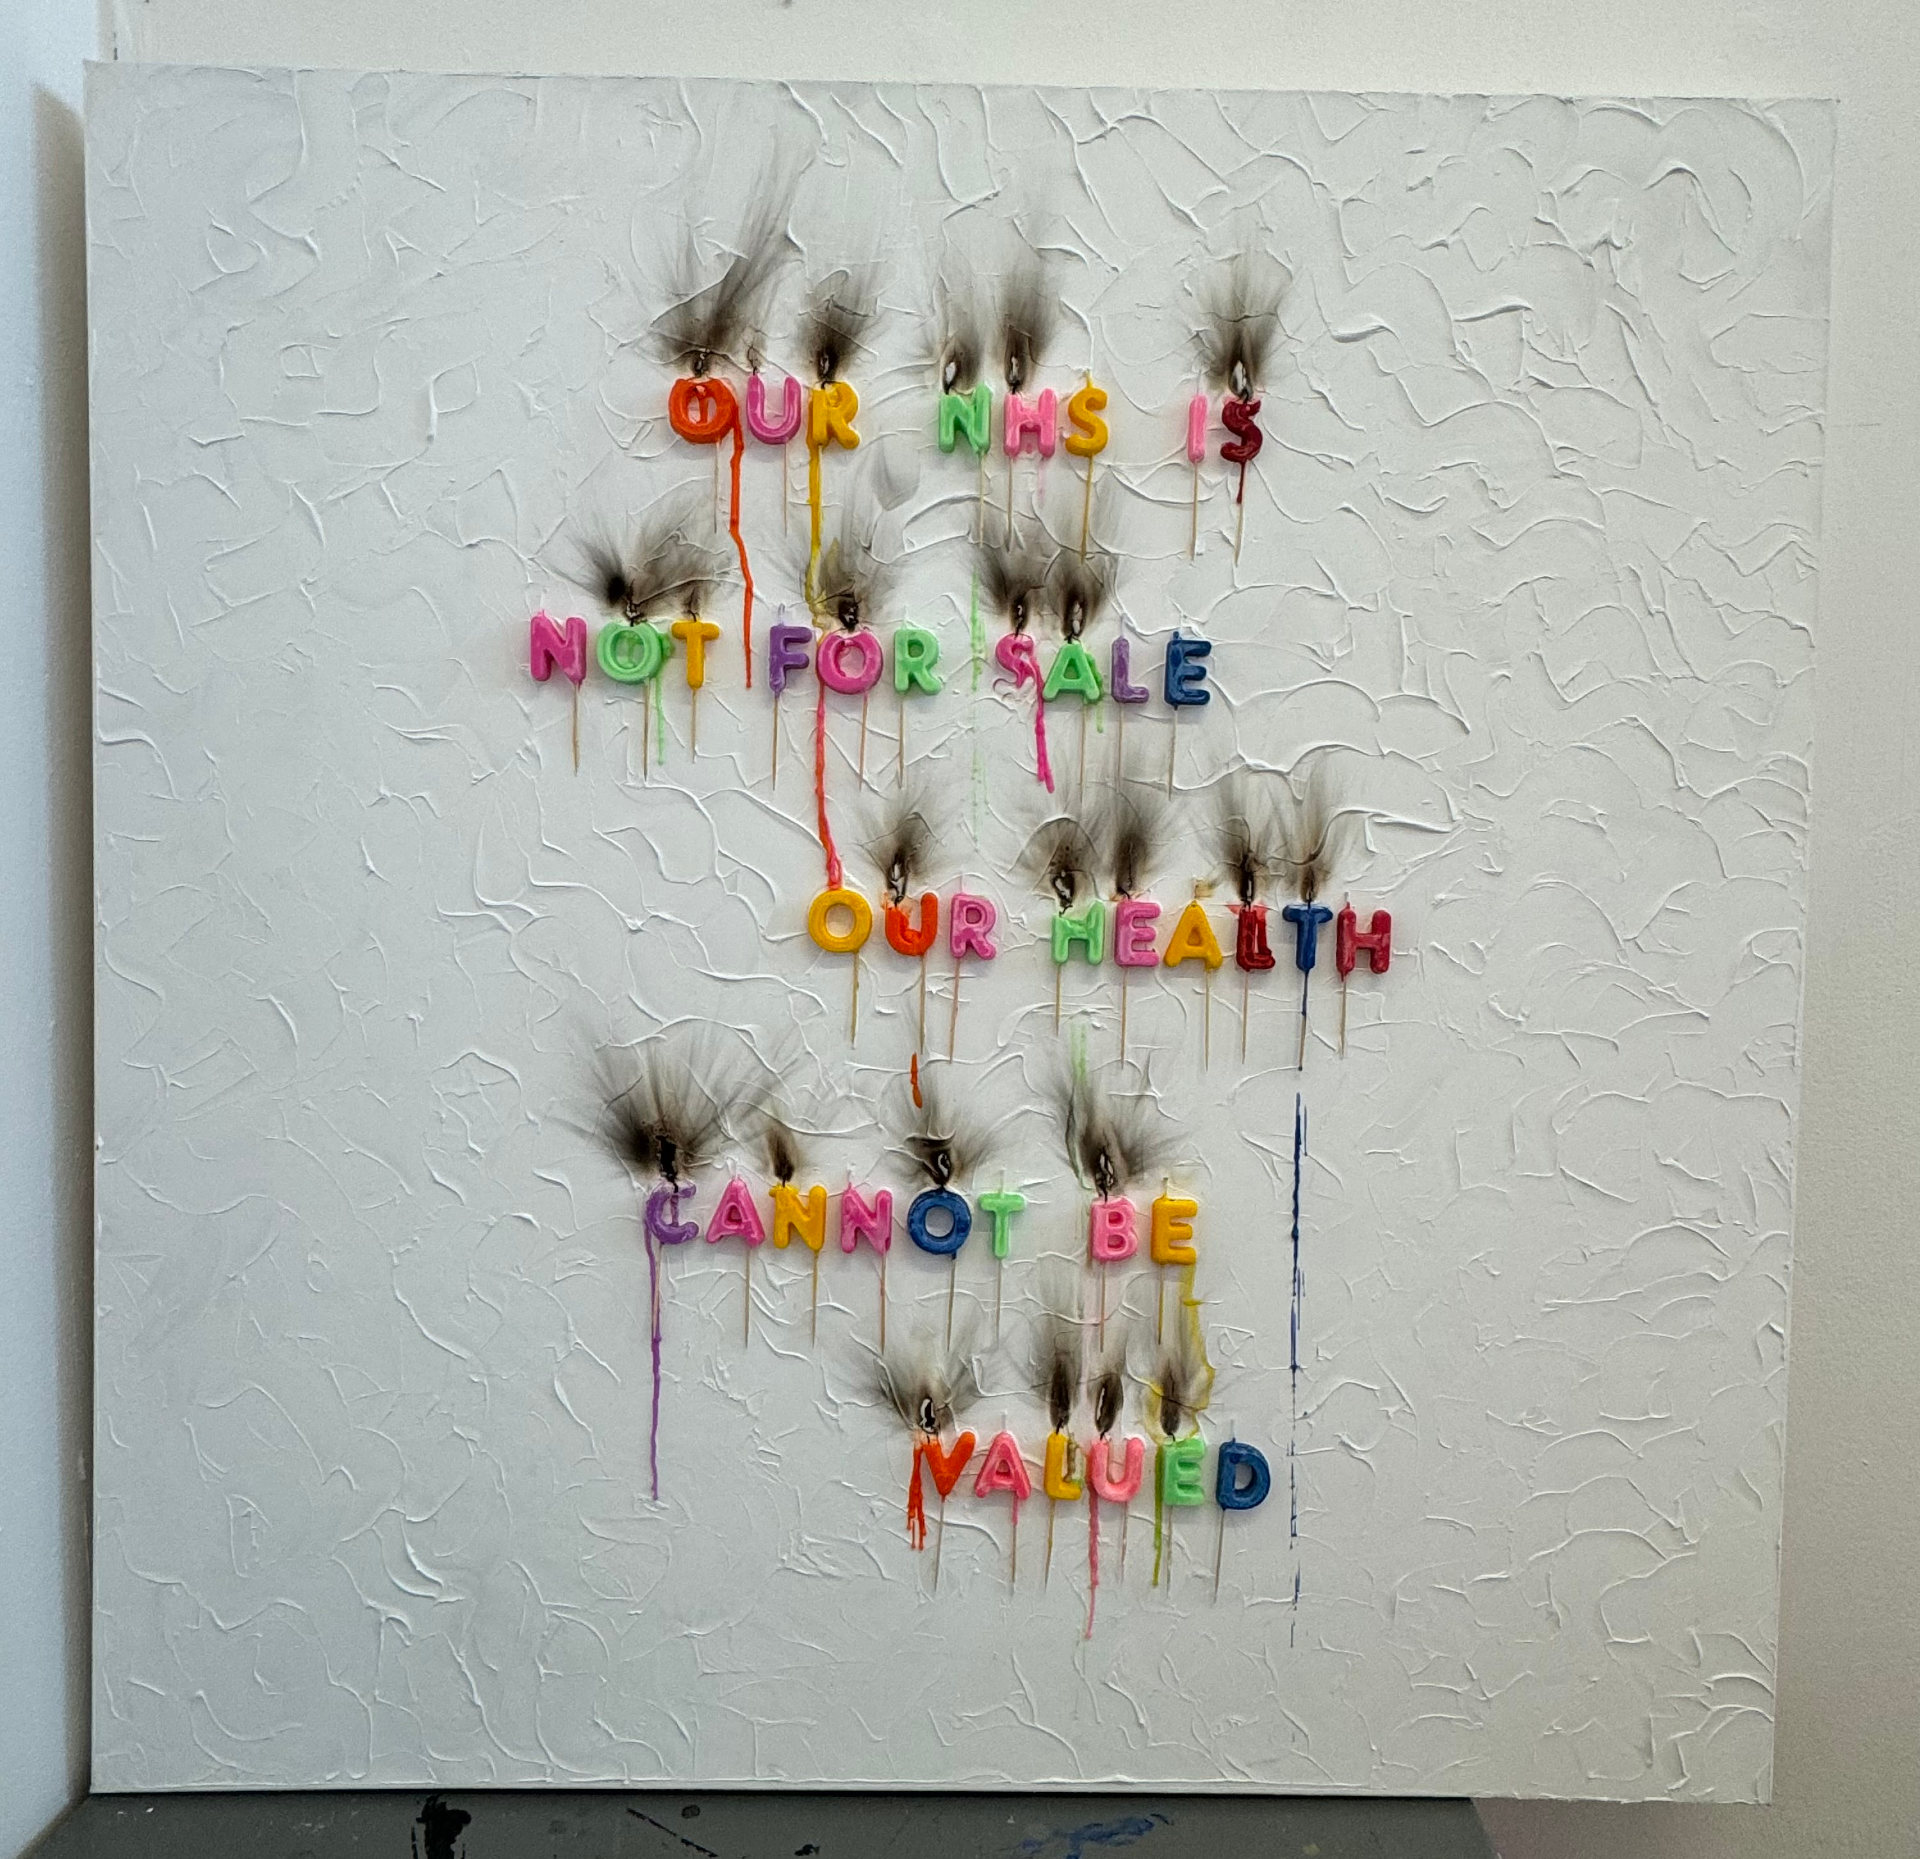 Canvas with fridge magnet letters spelling out 